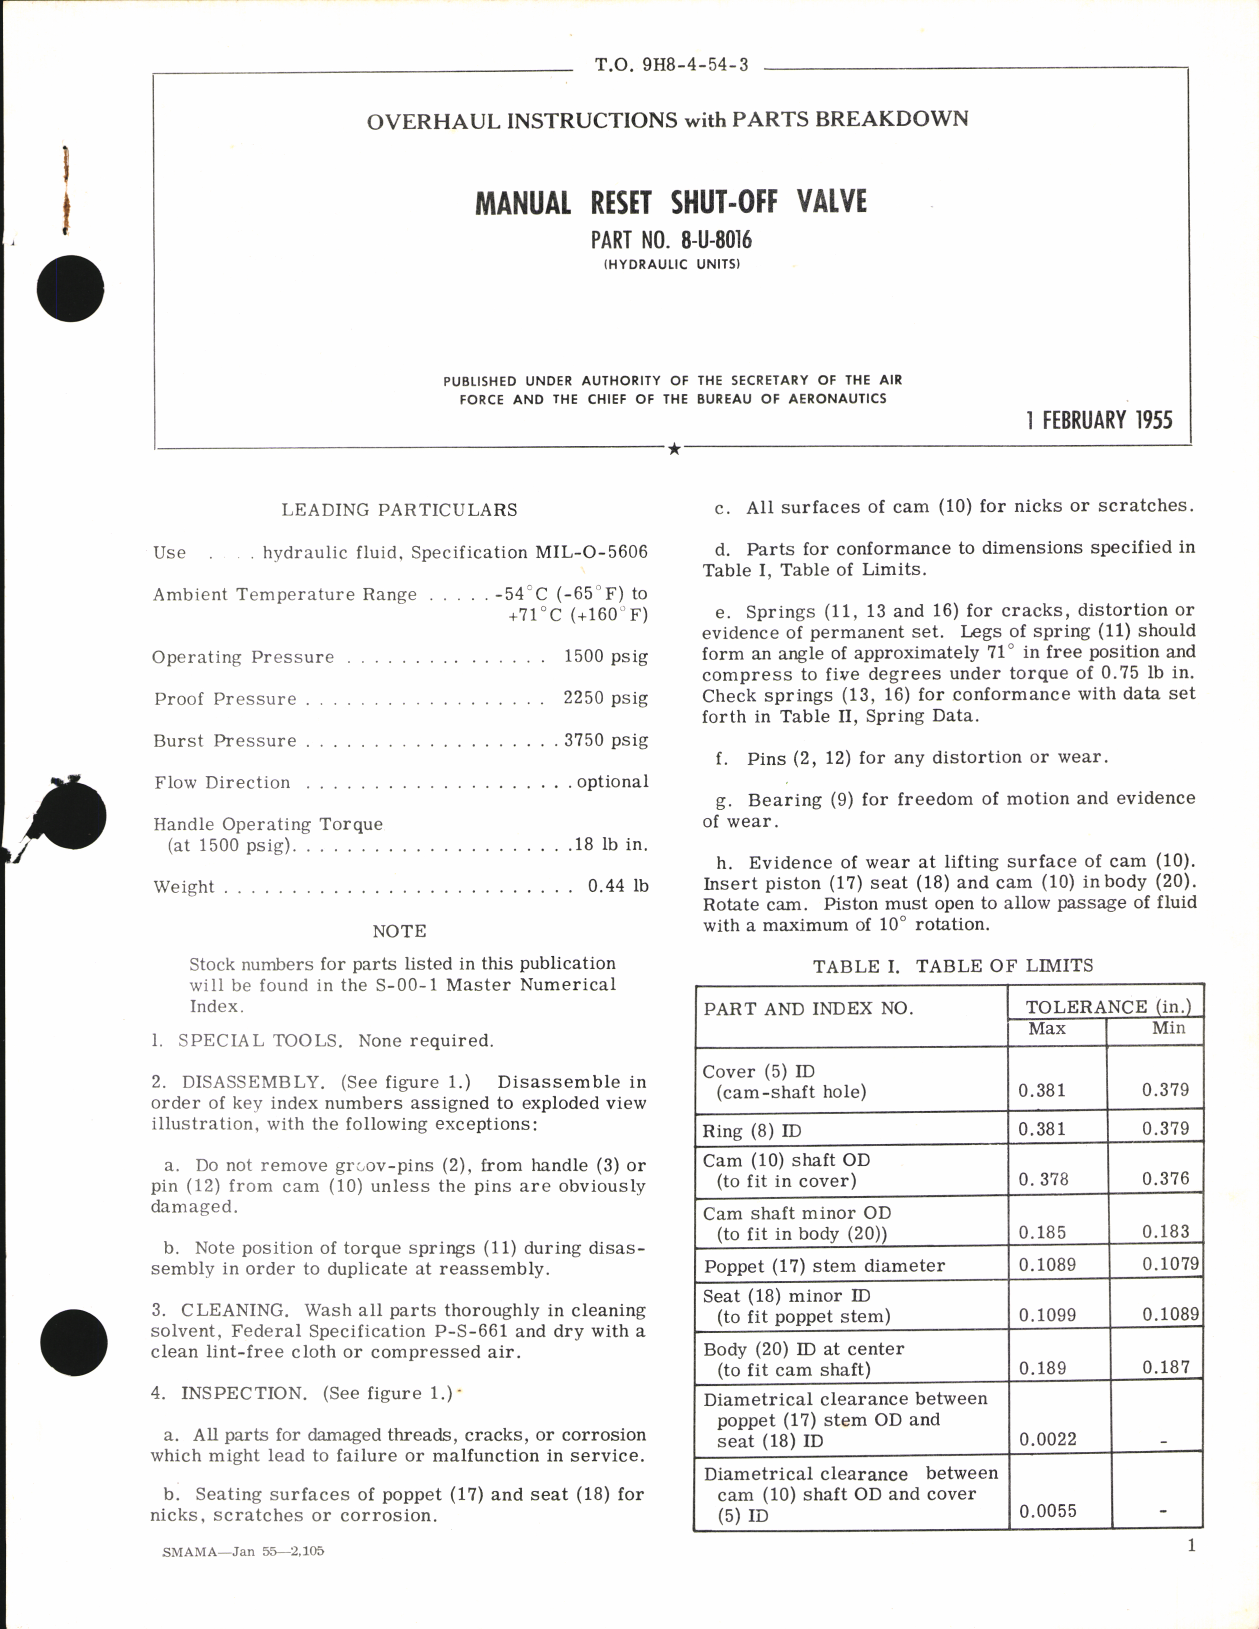 Sample page 1 from AirCorps Library document: Overhaul Instructions with Parts Breakdown for Manual Reset Shut-Off Valve Part No. 8-U-8016